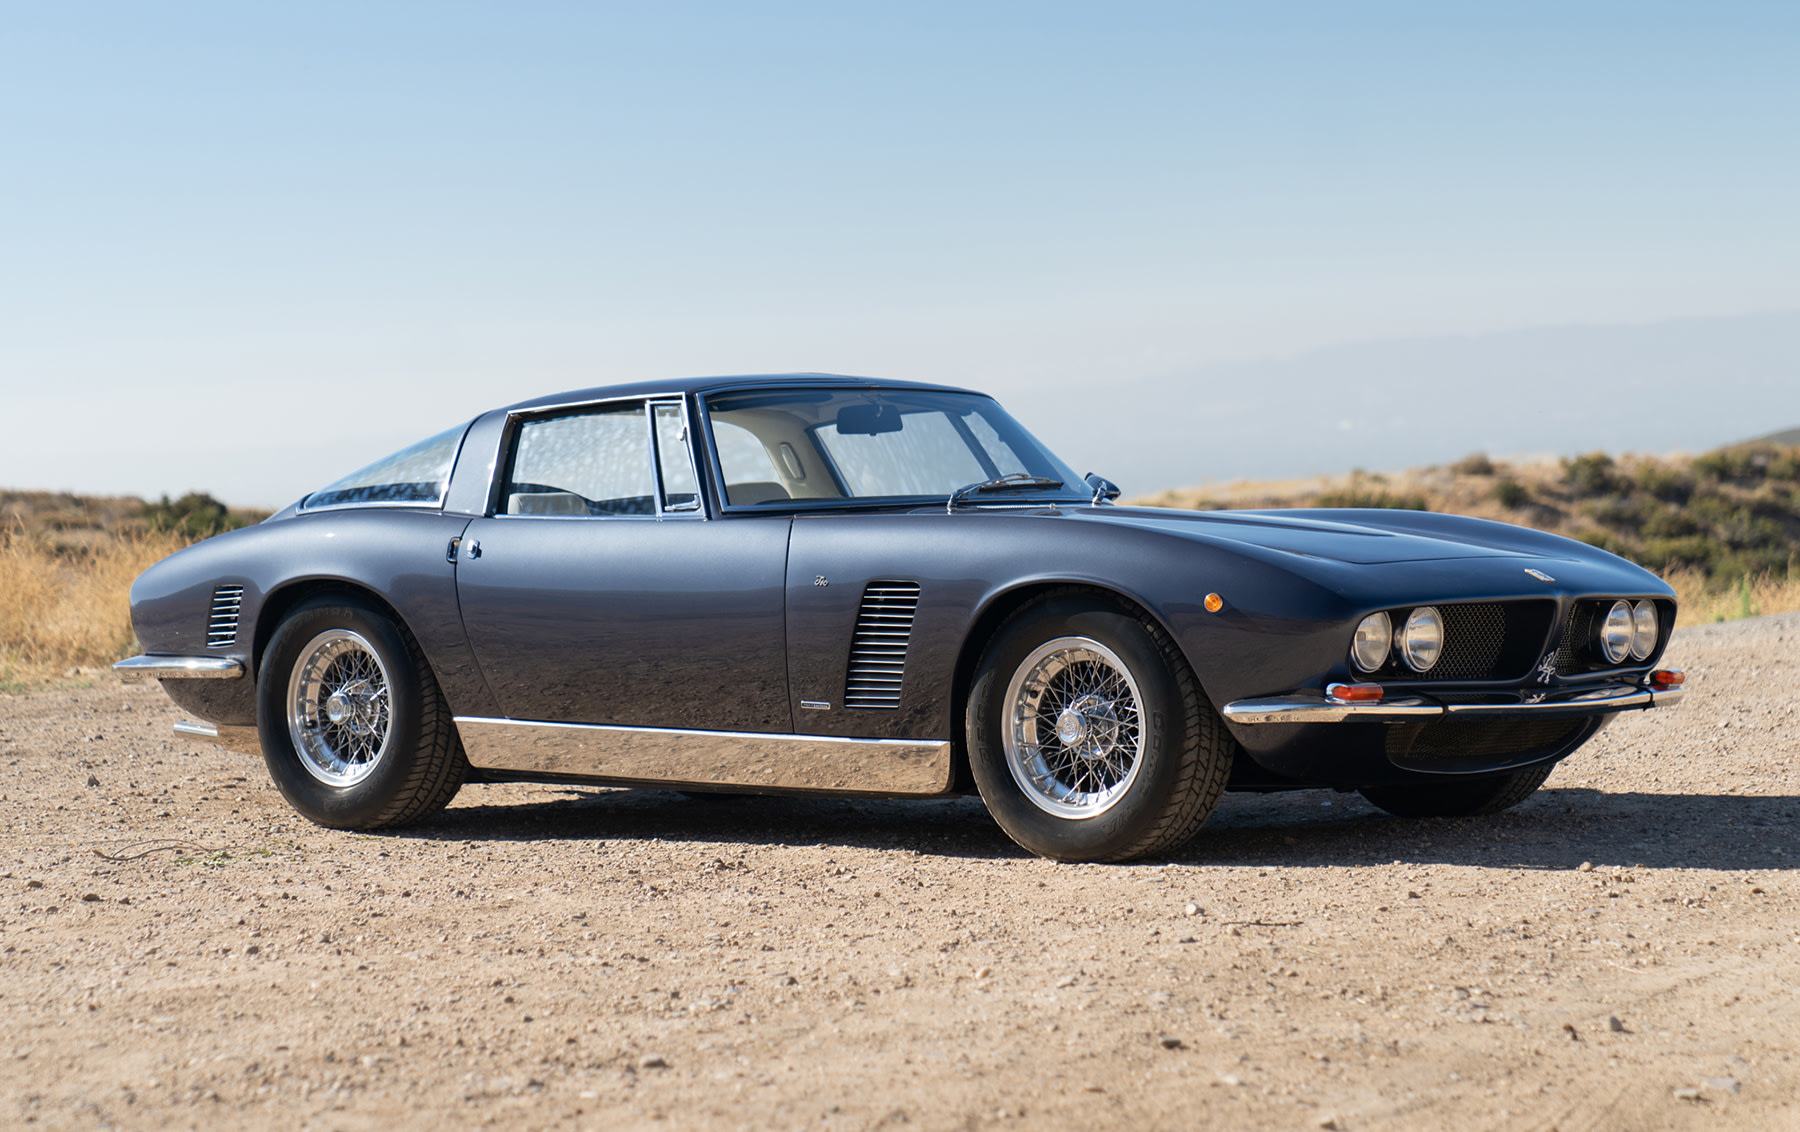 Iso Grifo Wallpapers